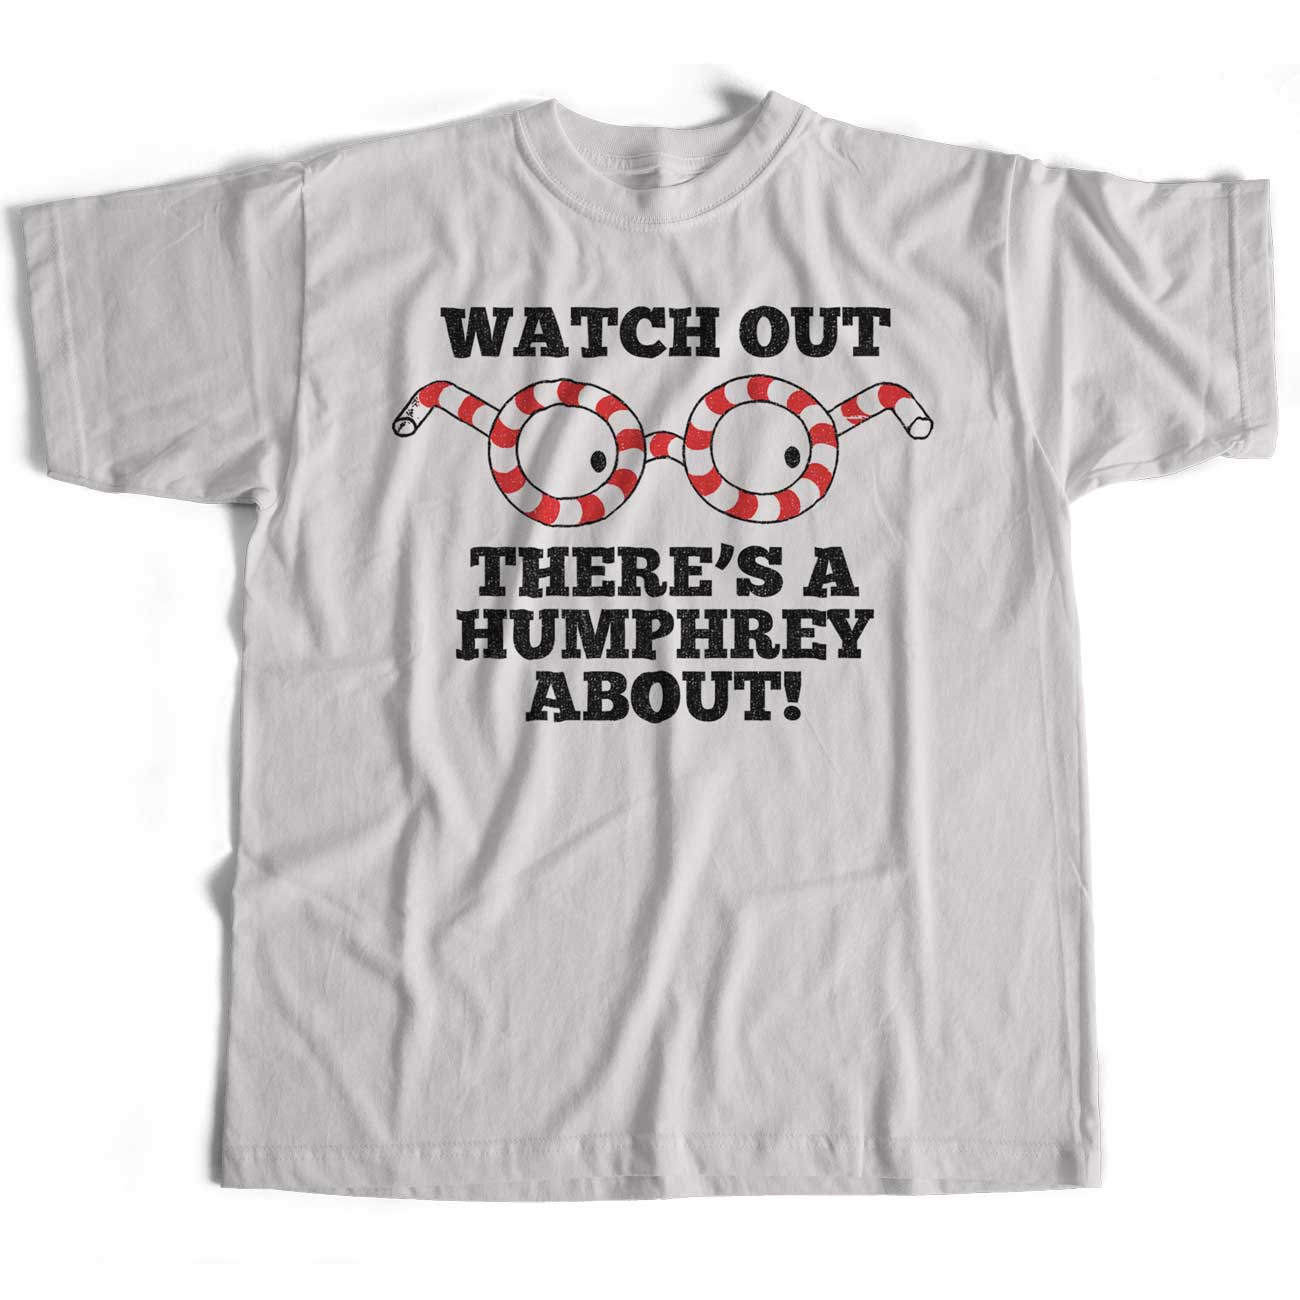 Watch Out There's A Humphrey About T Shirt - Cult 70's TV Advert Design